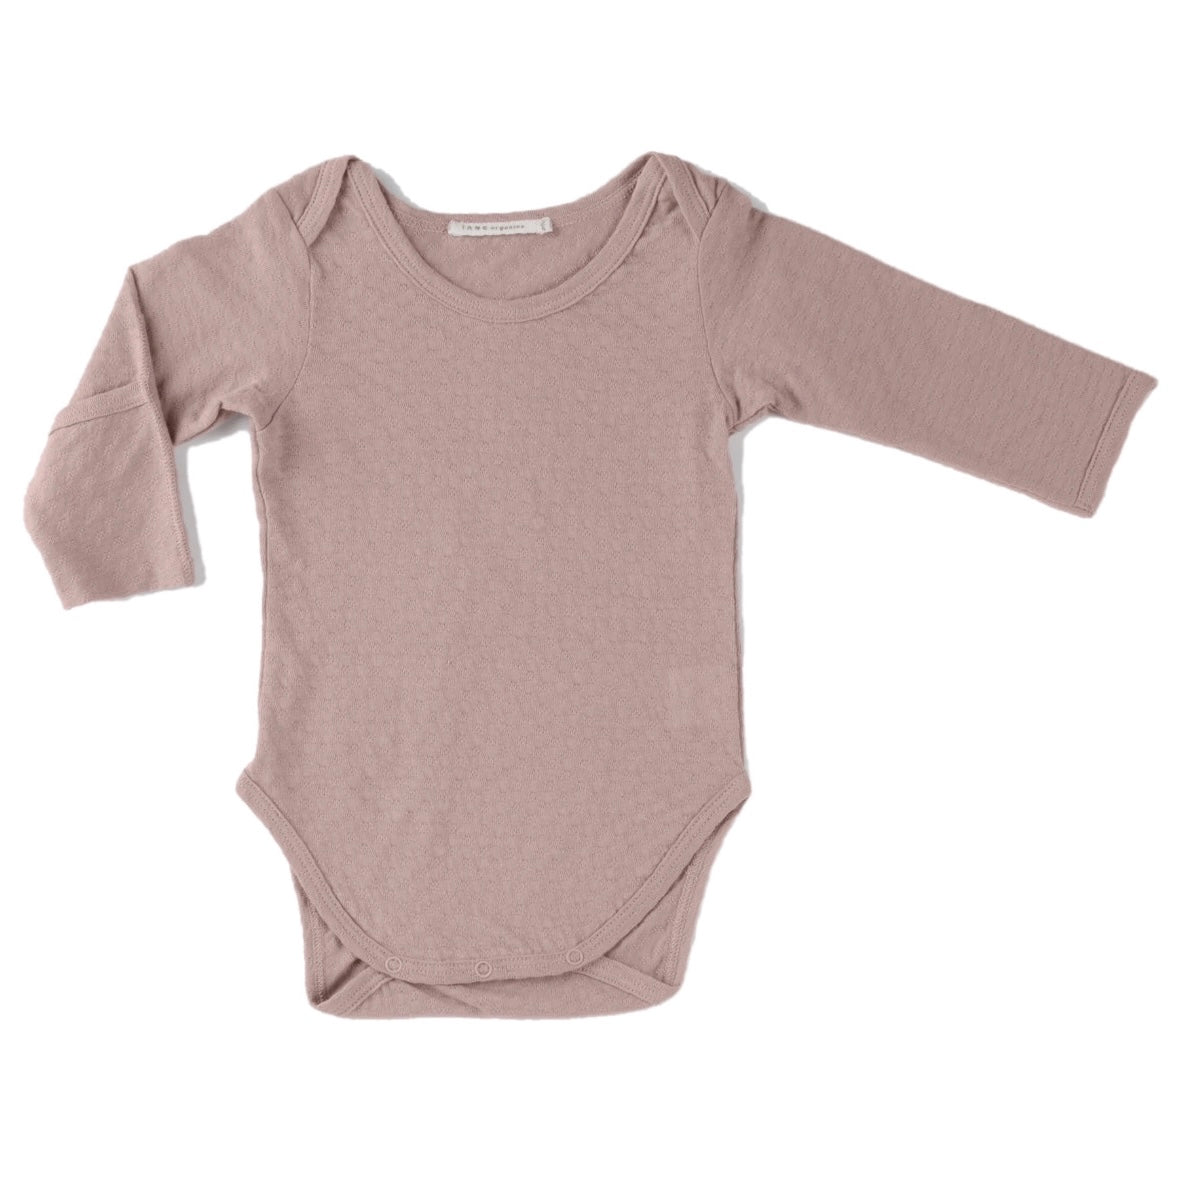 rose color pointelle essential crewneck onesie with handcover.  100% organic cotton.